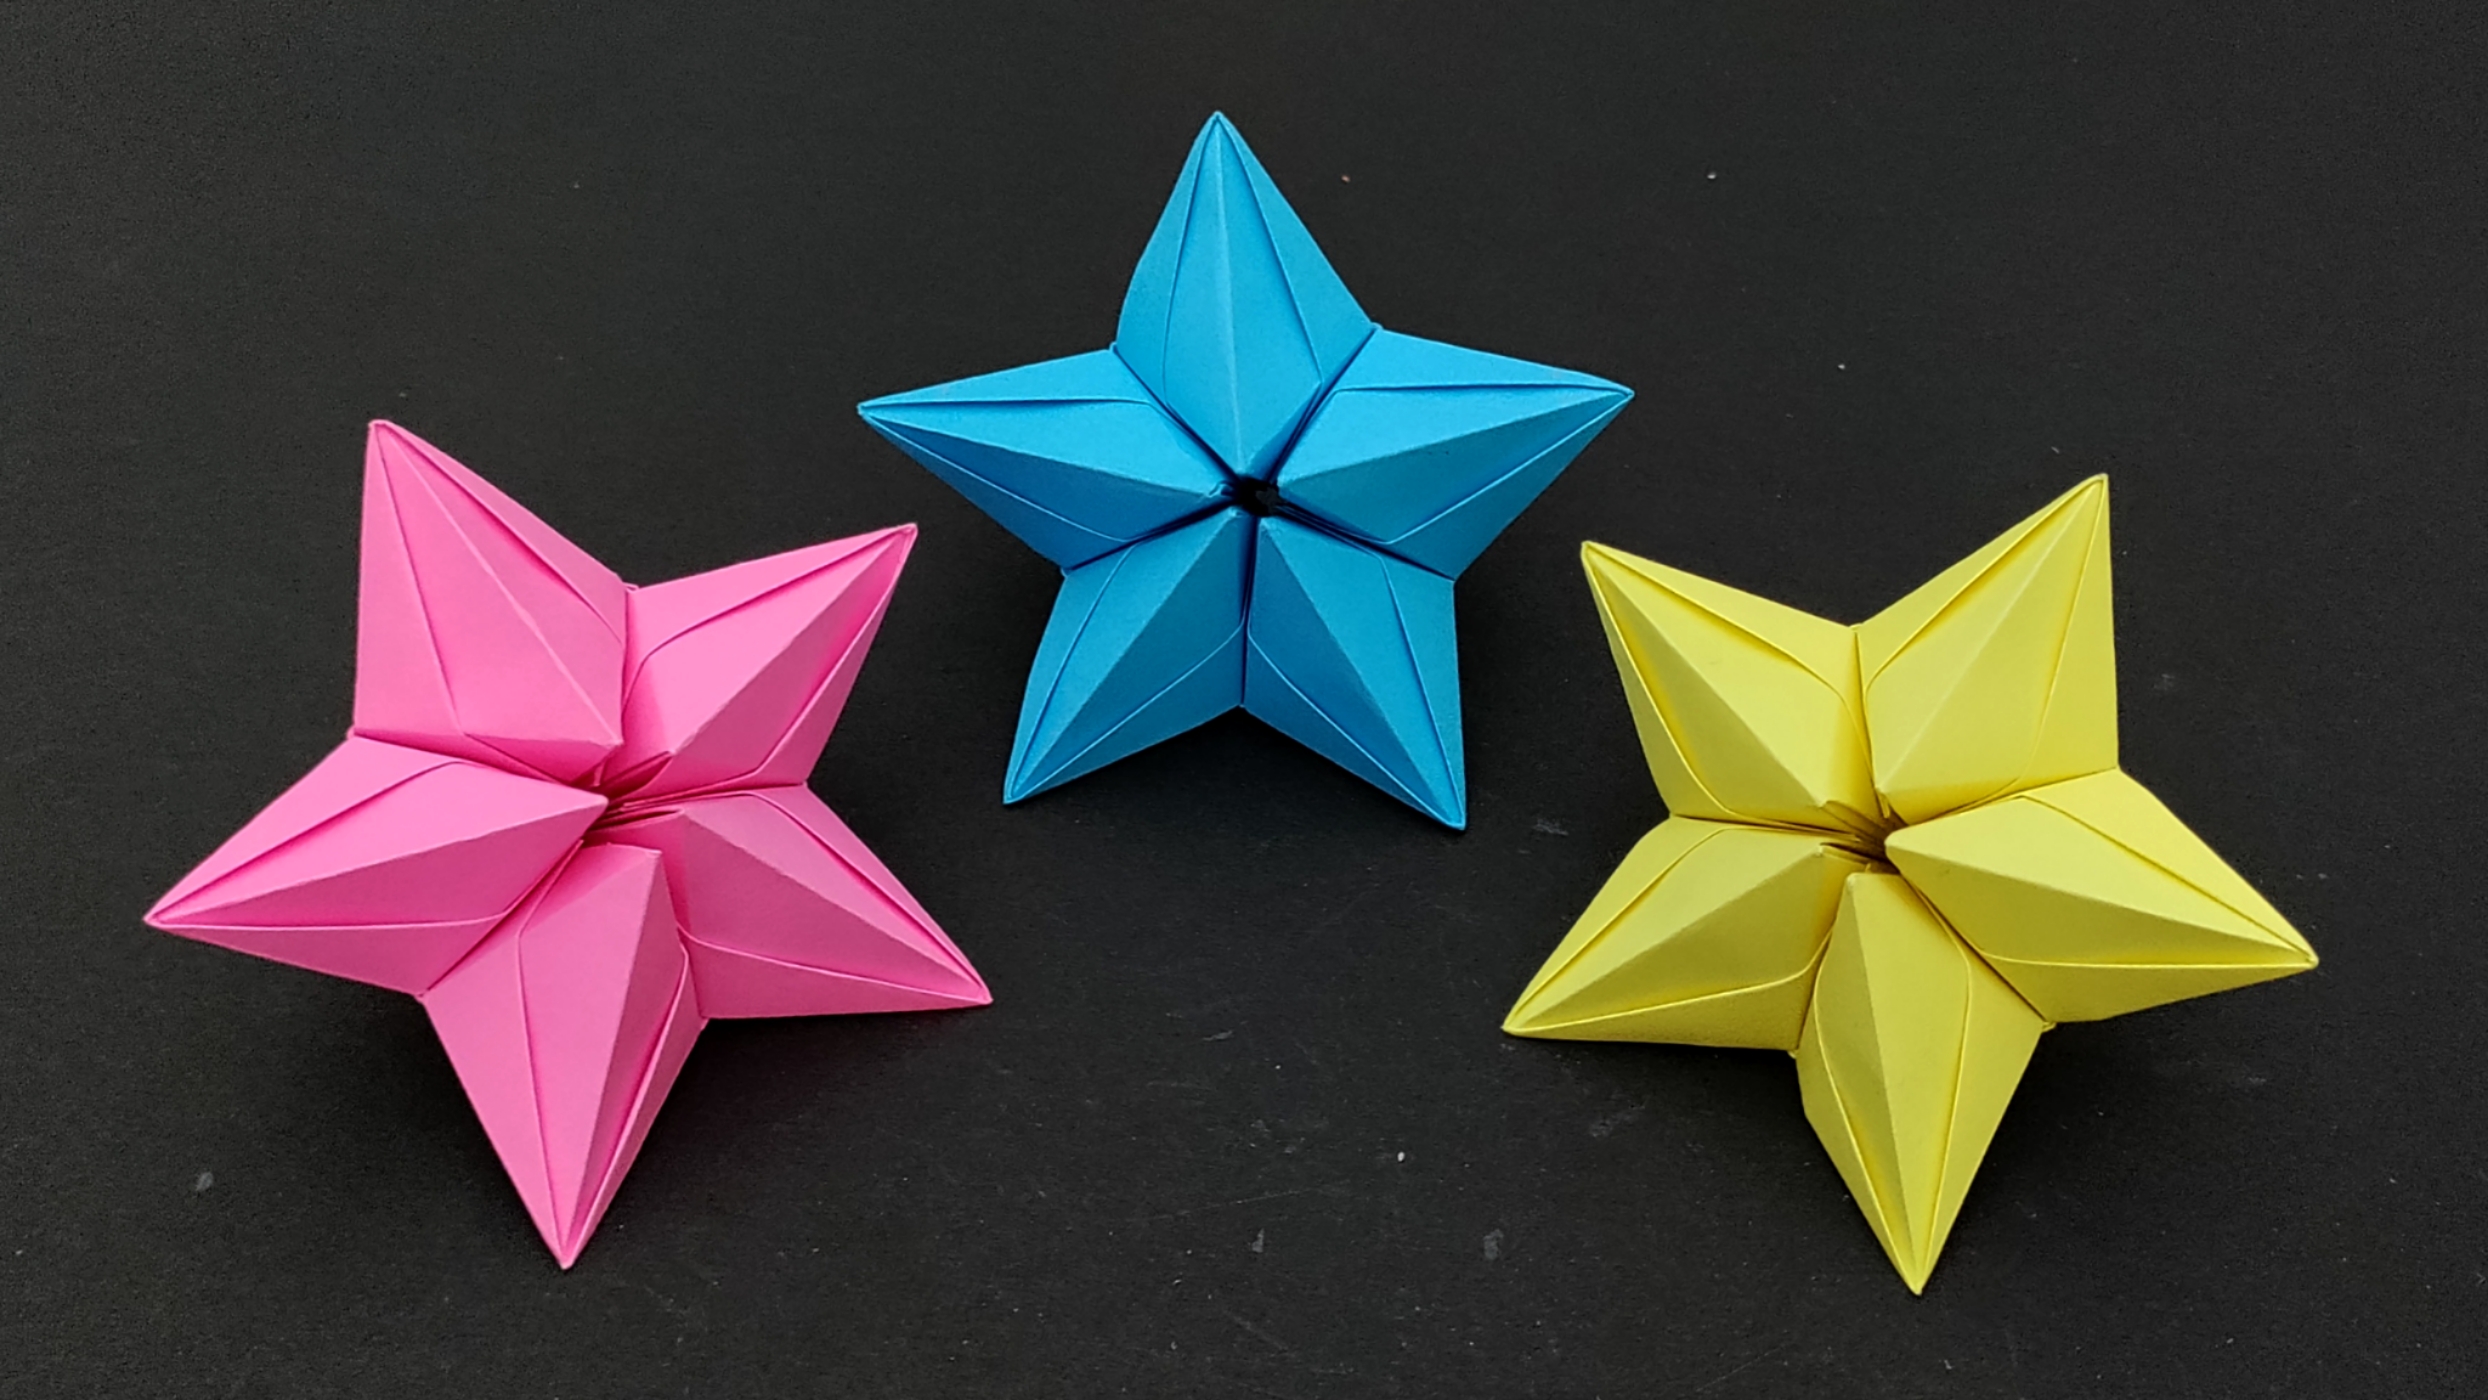 How to Make an Easy Do-it-Yourself Christmas Star Craft.